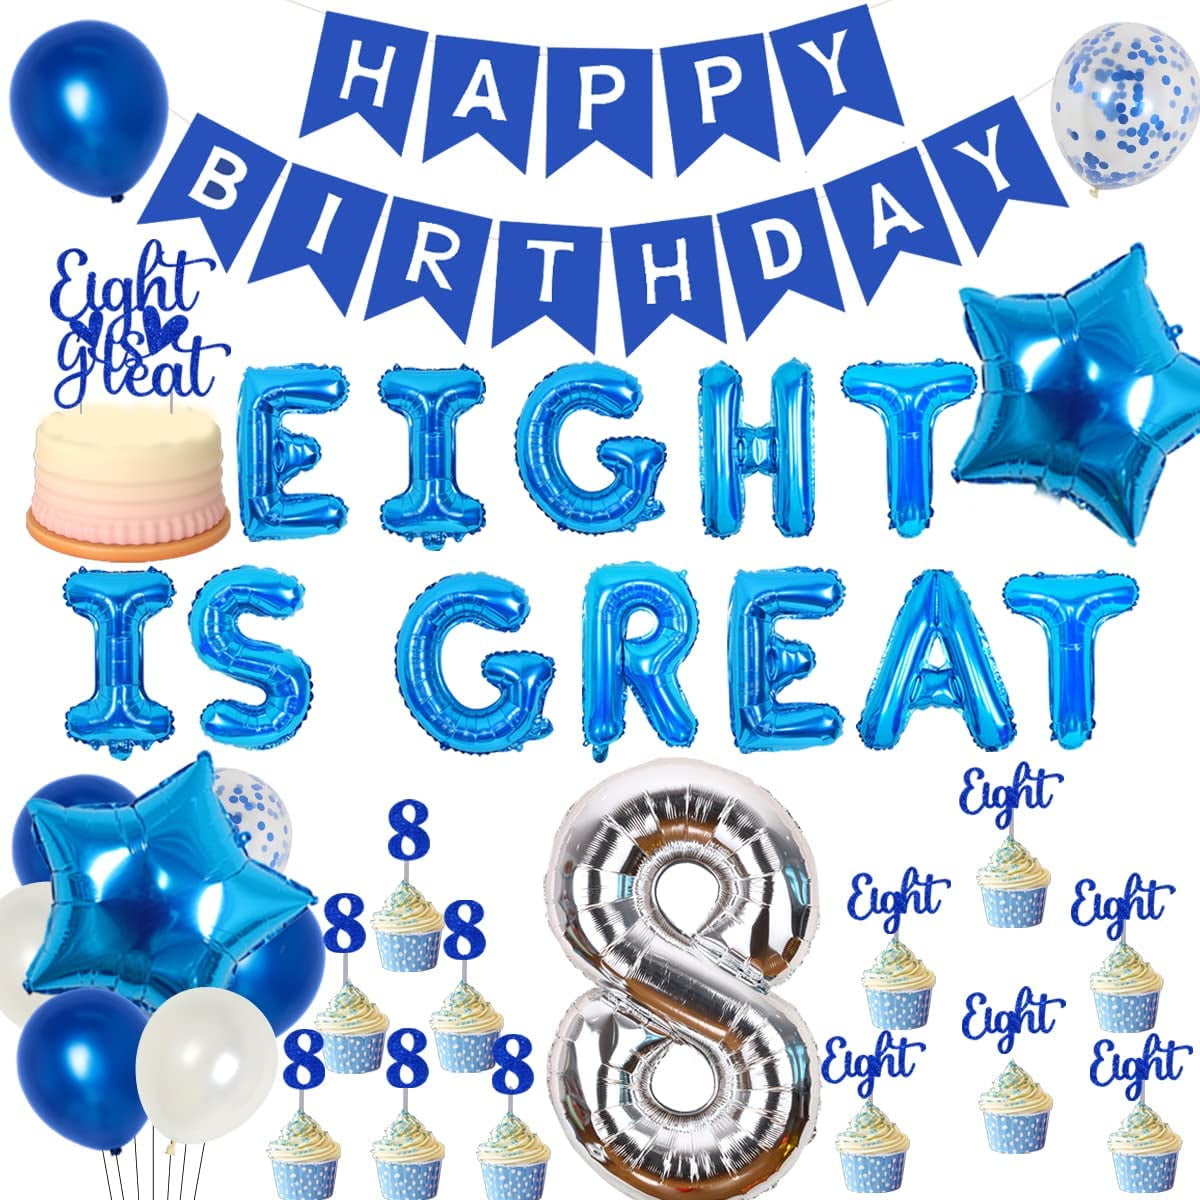 Eight Is Great Birthday Decorations Blue, Boys 8th Birthday Party Supplies with Blue 12inch Balloons Happy Birthday Banner Backdrop Decor, Royal Blue 8 Years Old Boy Birthday Party Decor - Walmart.com